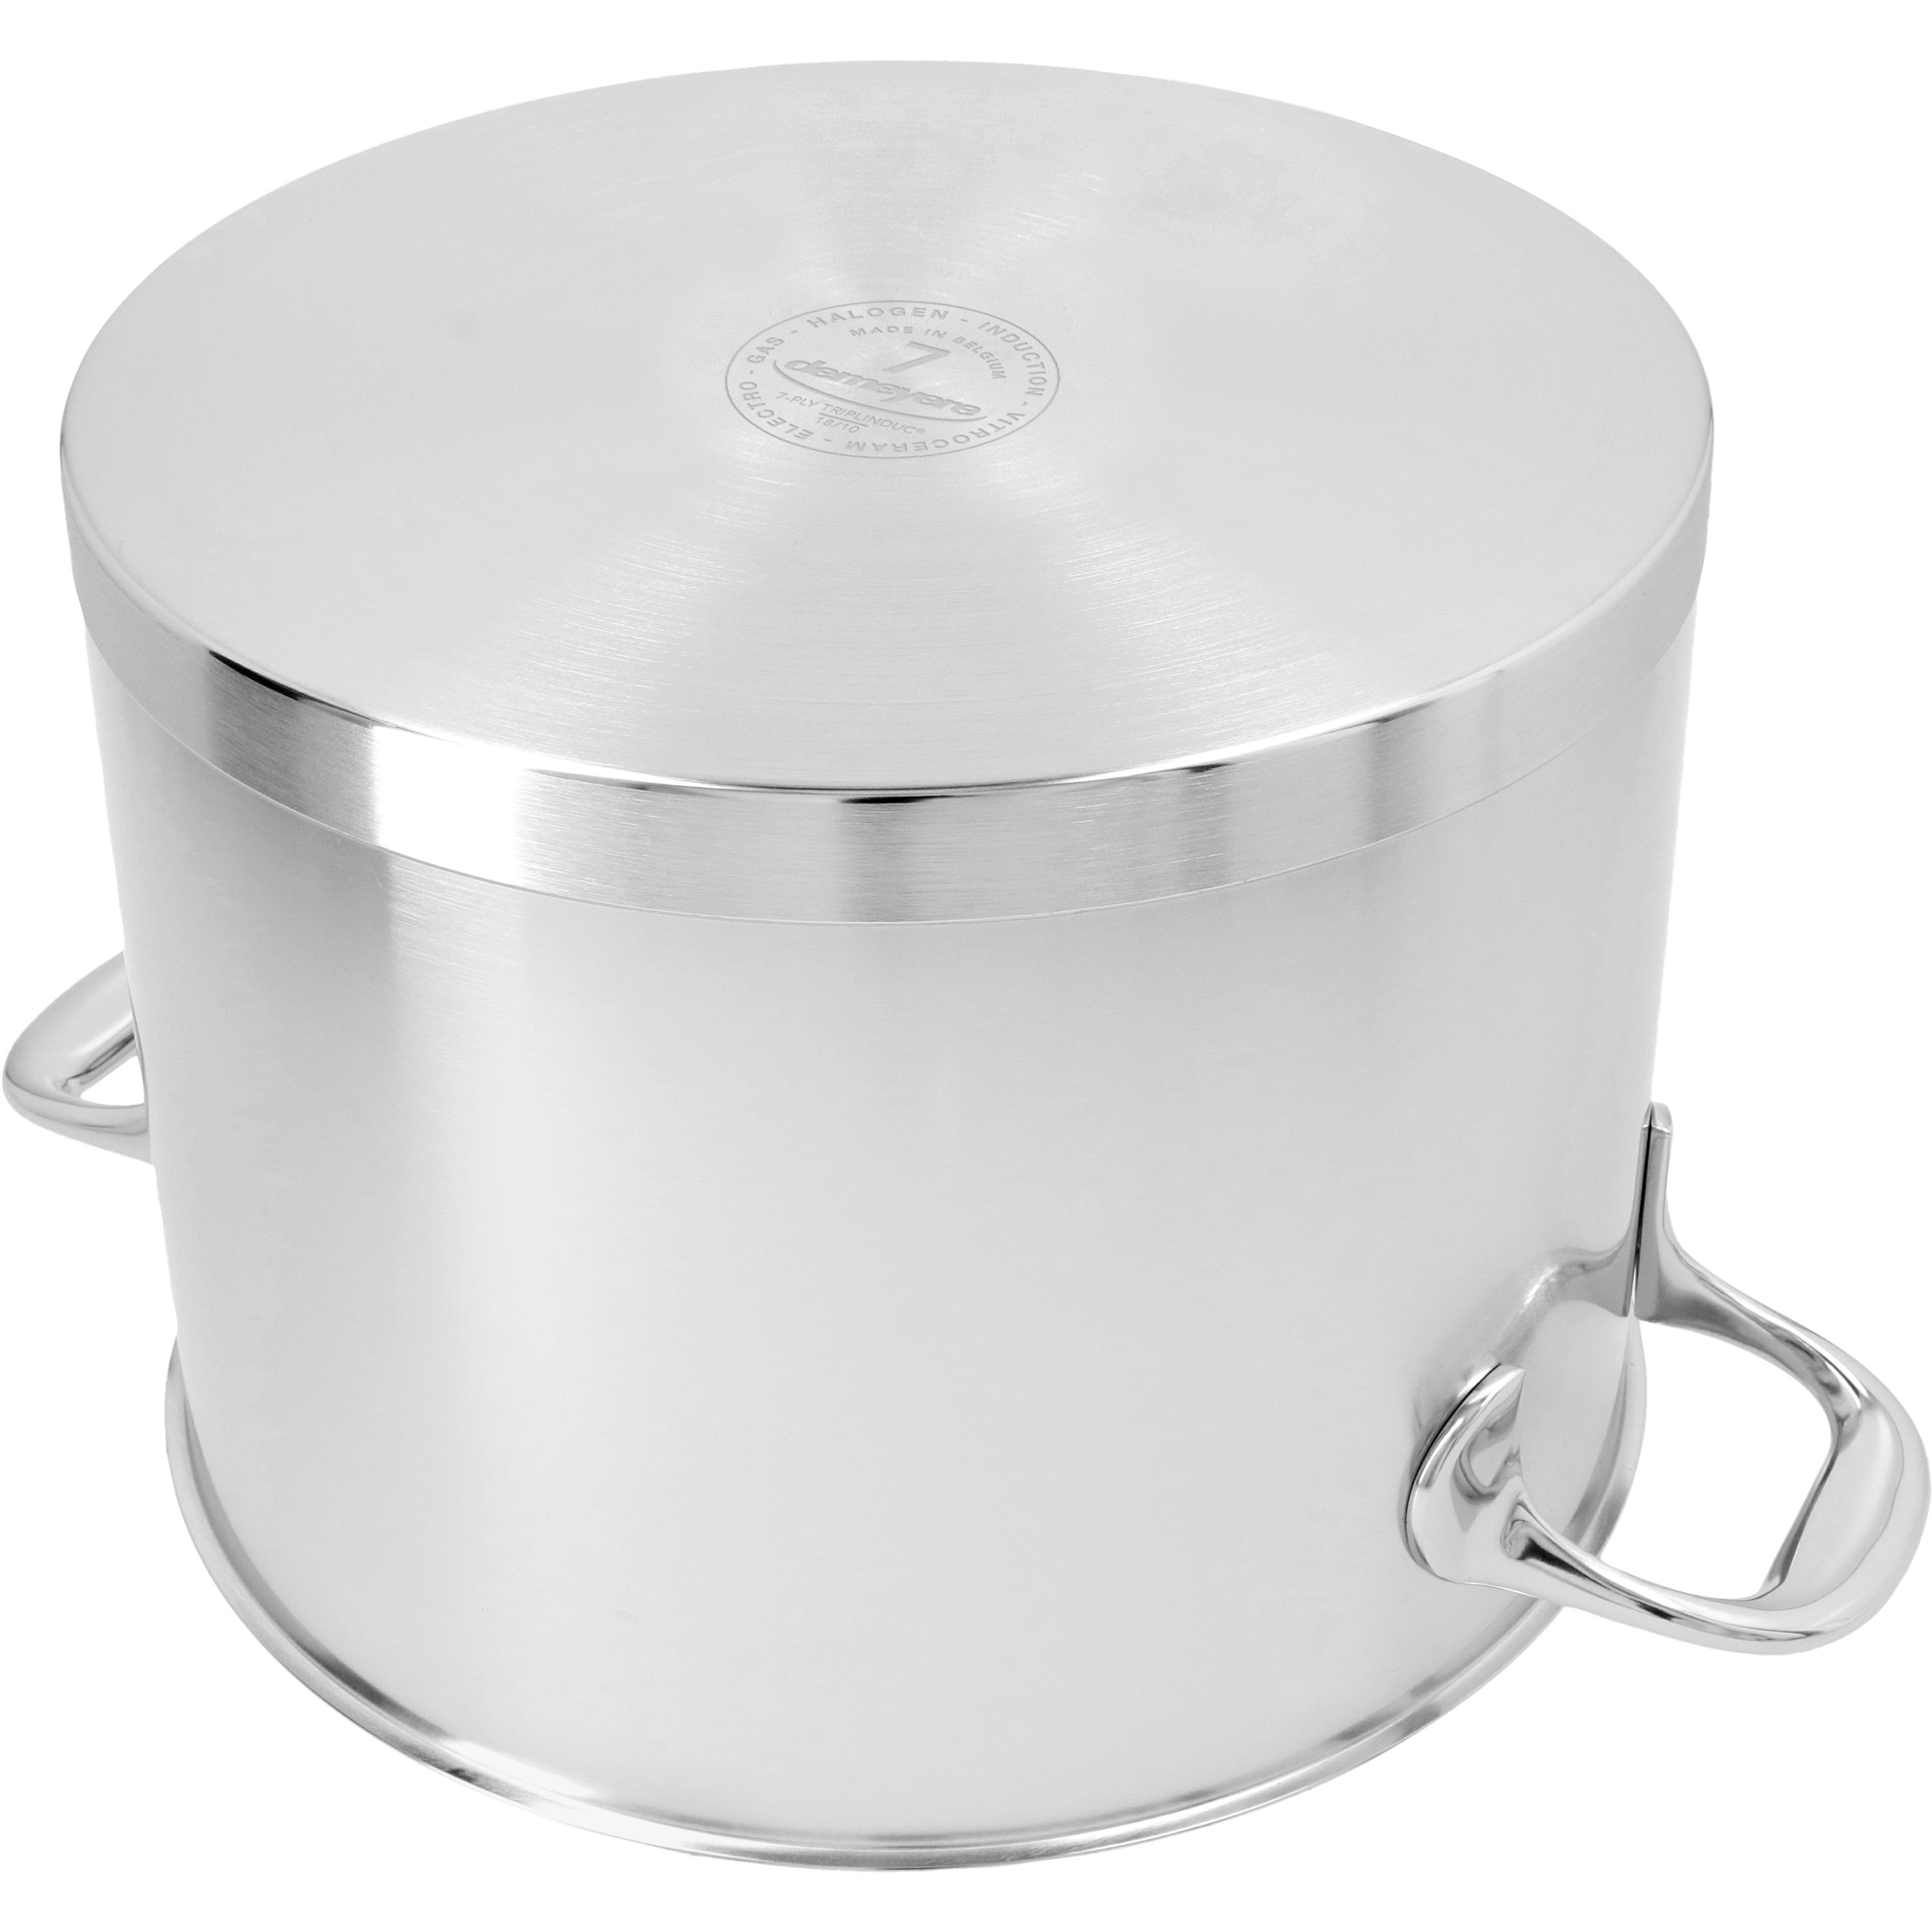 NEW Stainless Steel Stock POT with Lid 7 1/2 GALLON